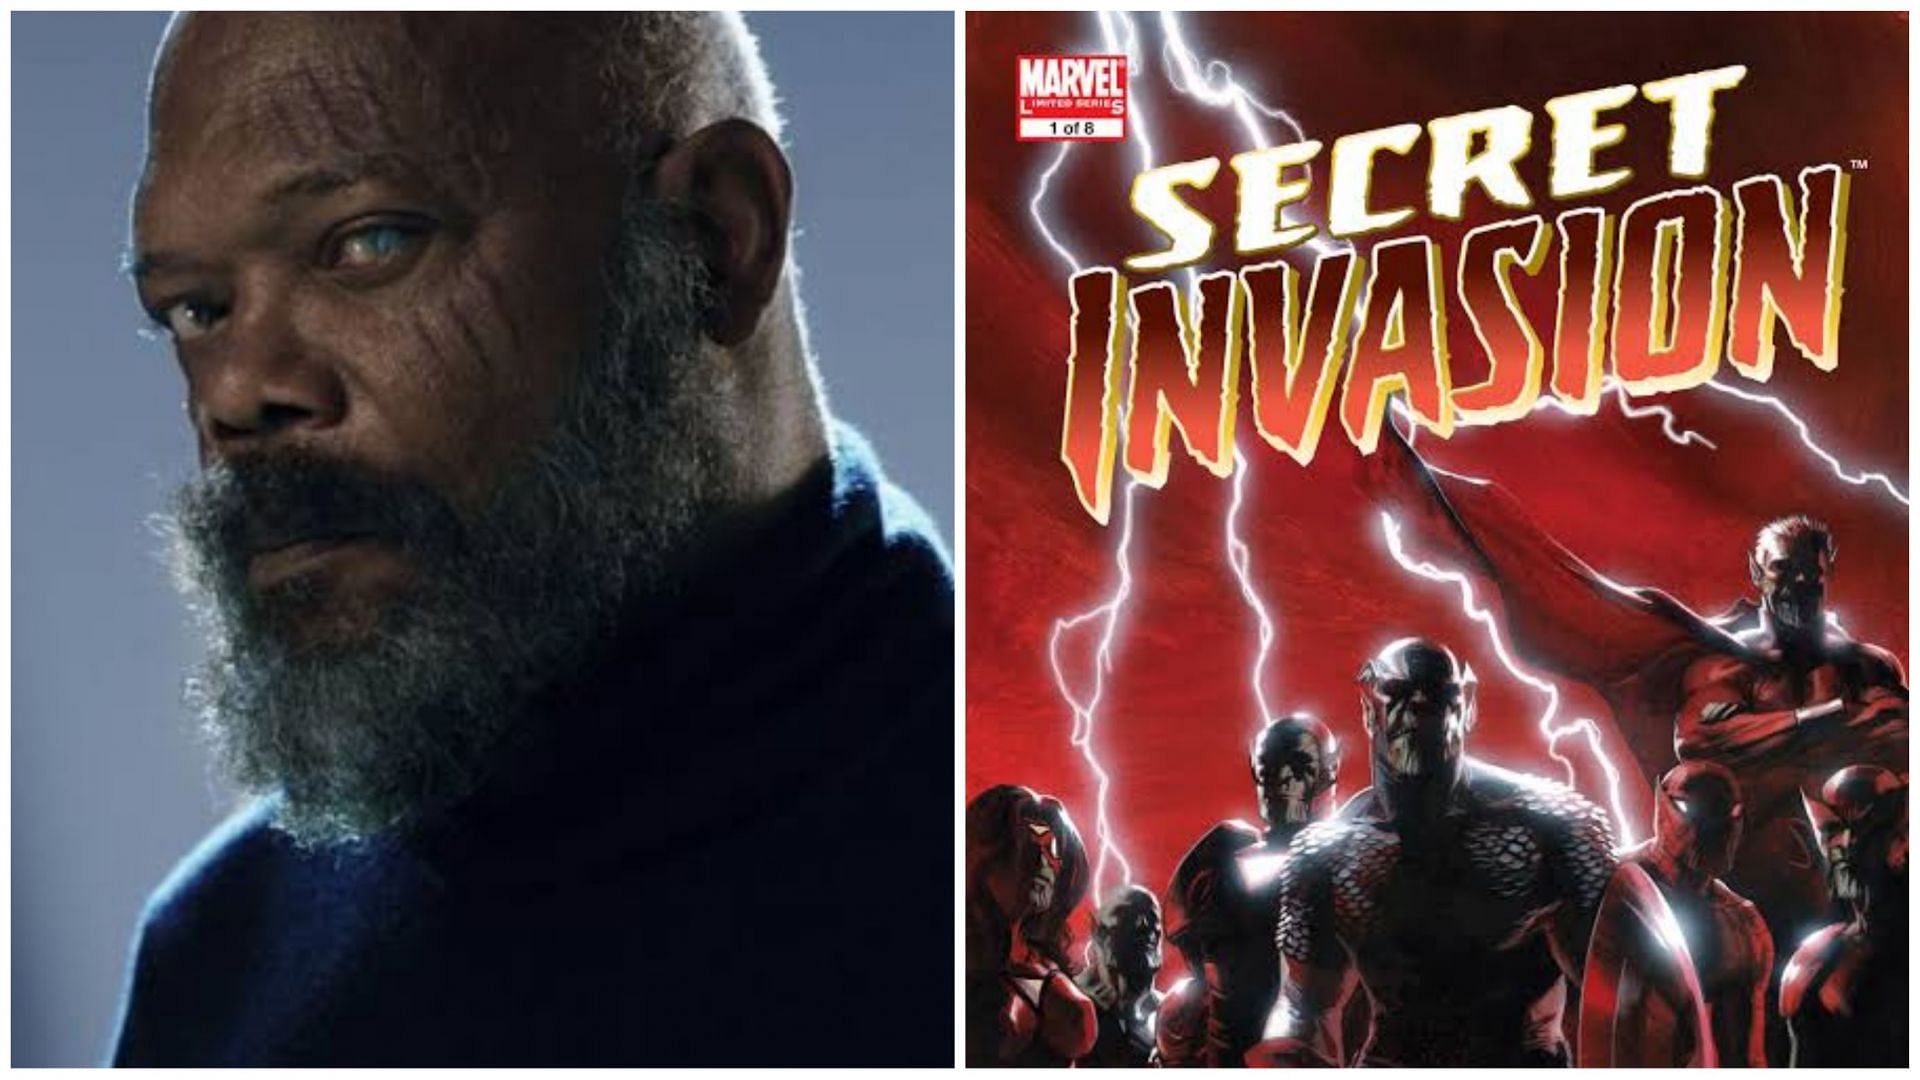 Samuel L Jackson as Nick Fury and cover for Secret Invasion (Images via Marvel Studios and Marvel Comics)